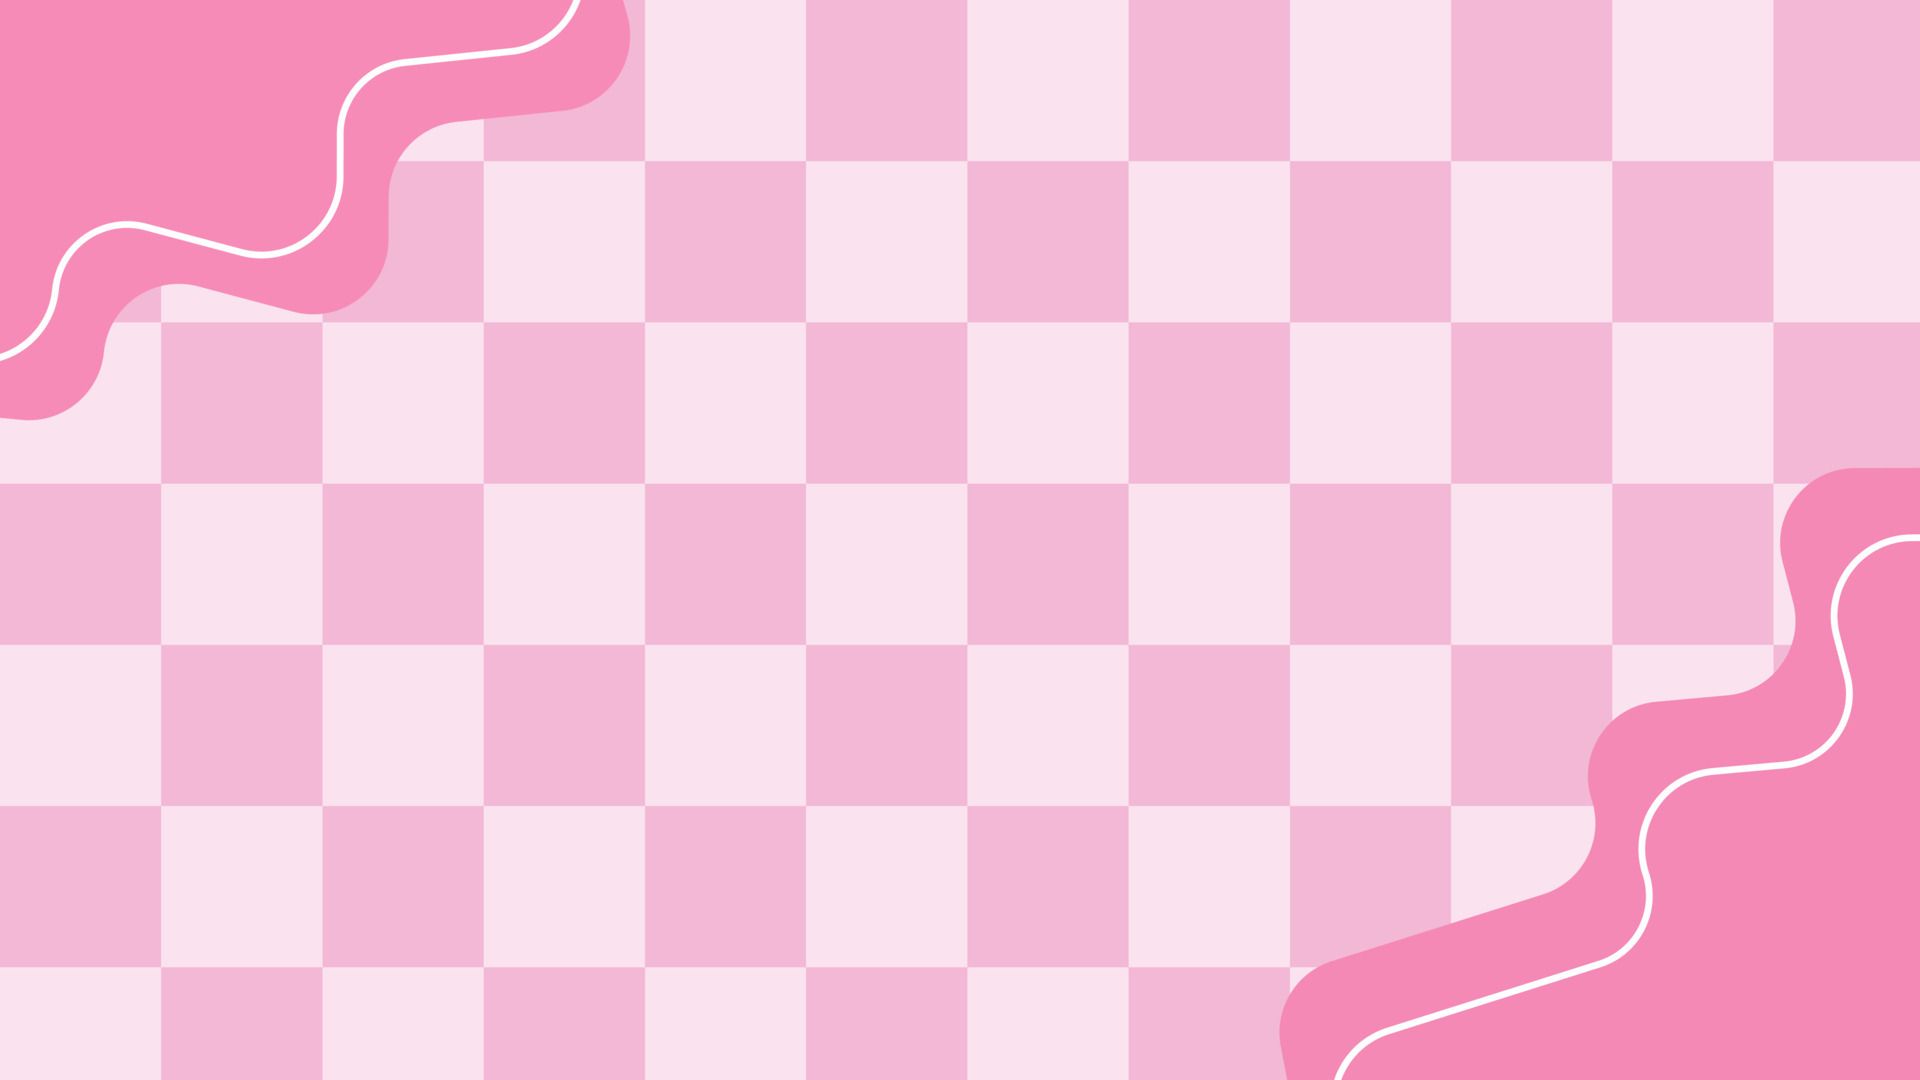 A pink and white checkered background with pink squiggly lines on the left and right sides. - Pink